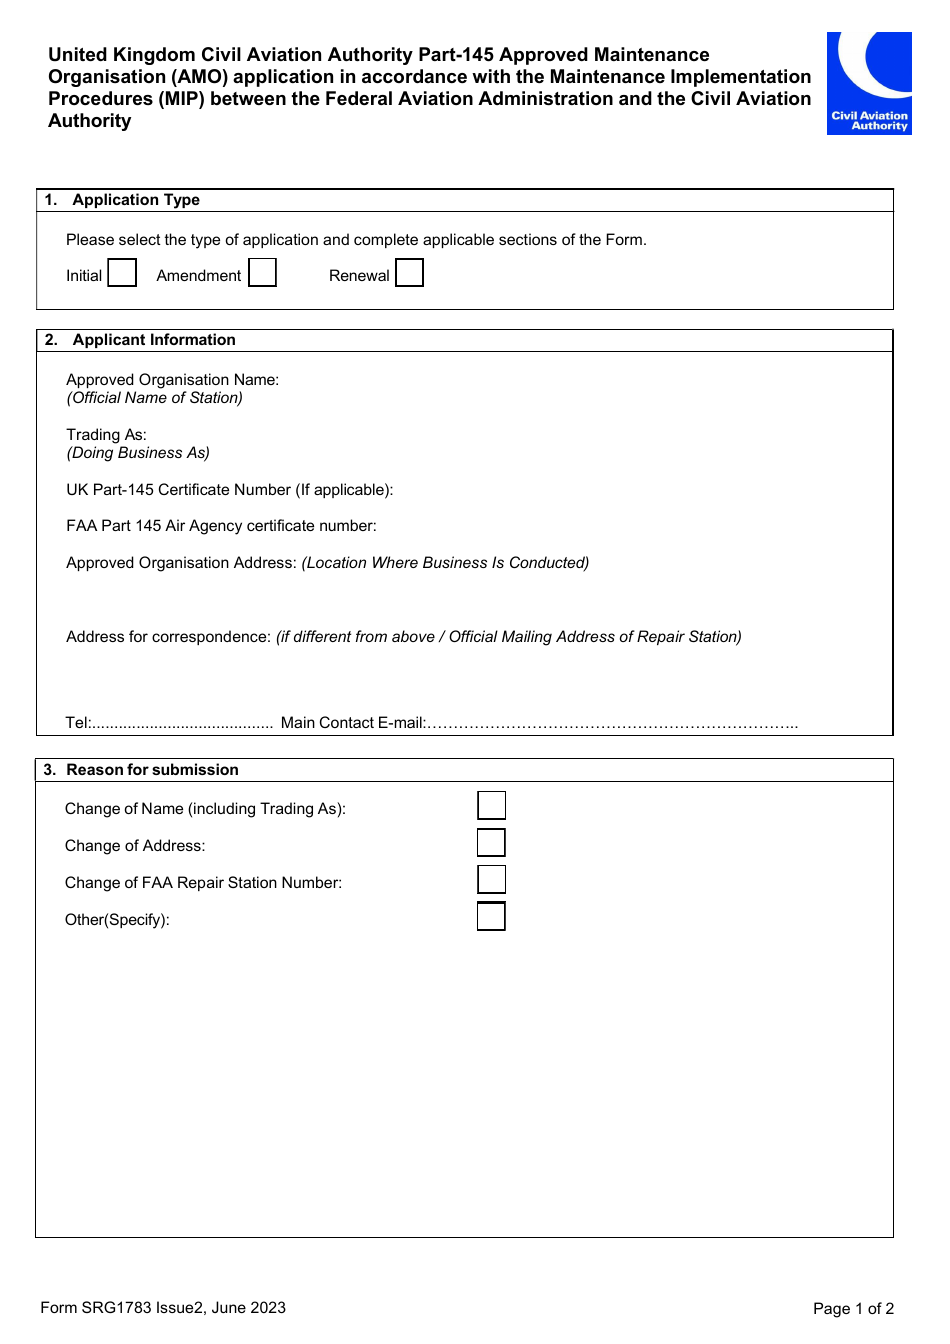 Form SRG1783 United Kingdom Civil Aviation Authority Part-145 Approved Maintenance Organisation (Amo) Application in Accordance With the Maintenance Implementation Procedures (Mip) Between the Federal Aviation Administration and the Civil Aviation Authority - United Kingdom, Page 1